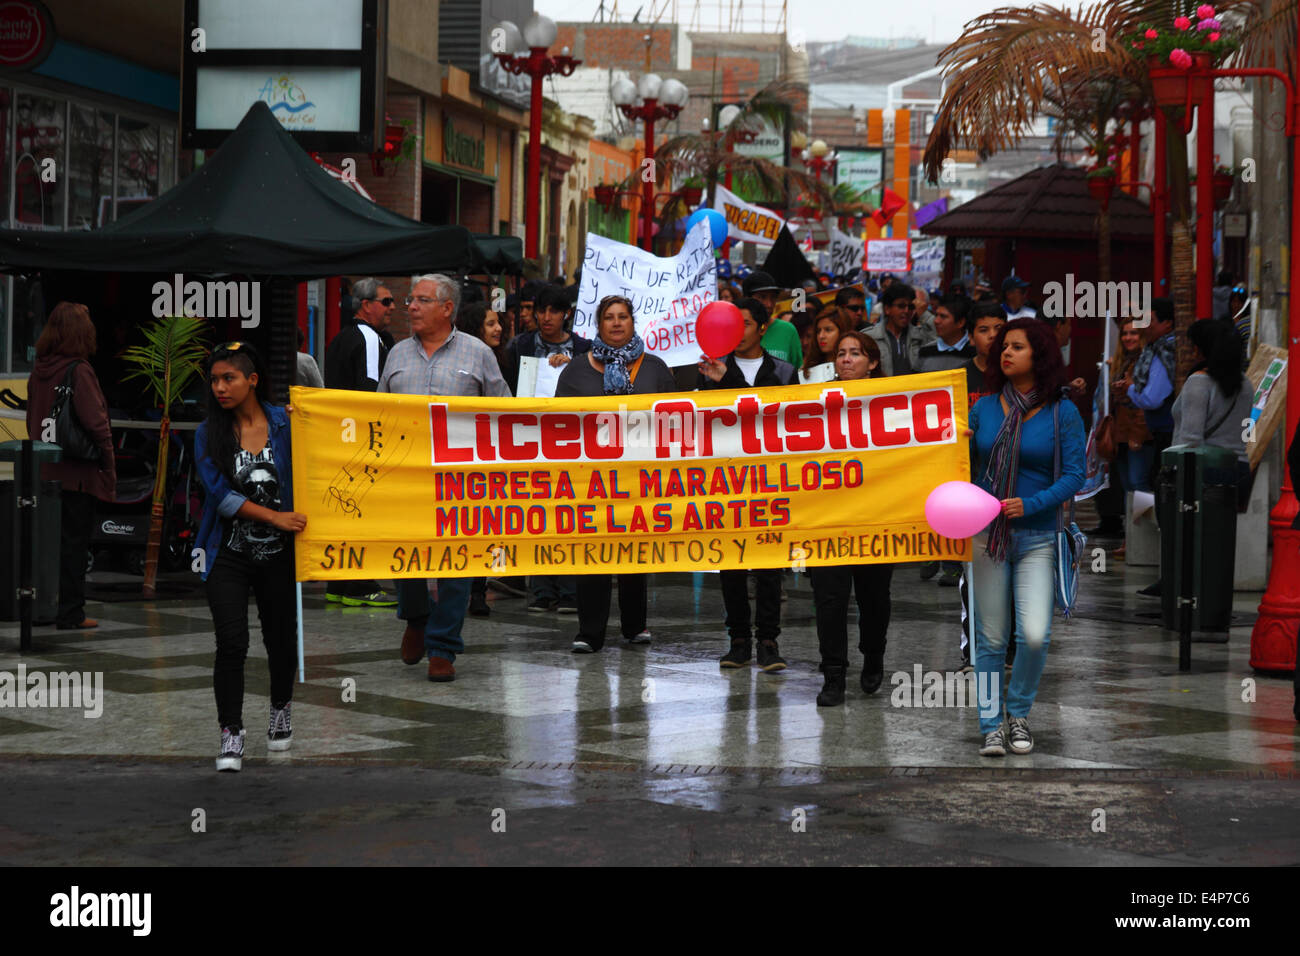 Teachers during a protest march against government education policies and lack of funding for an arts school, Arica, Chile Stock Photo